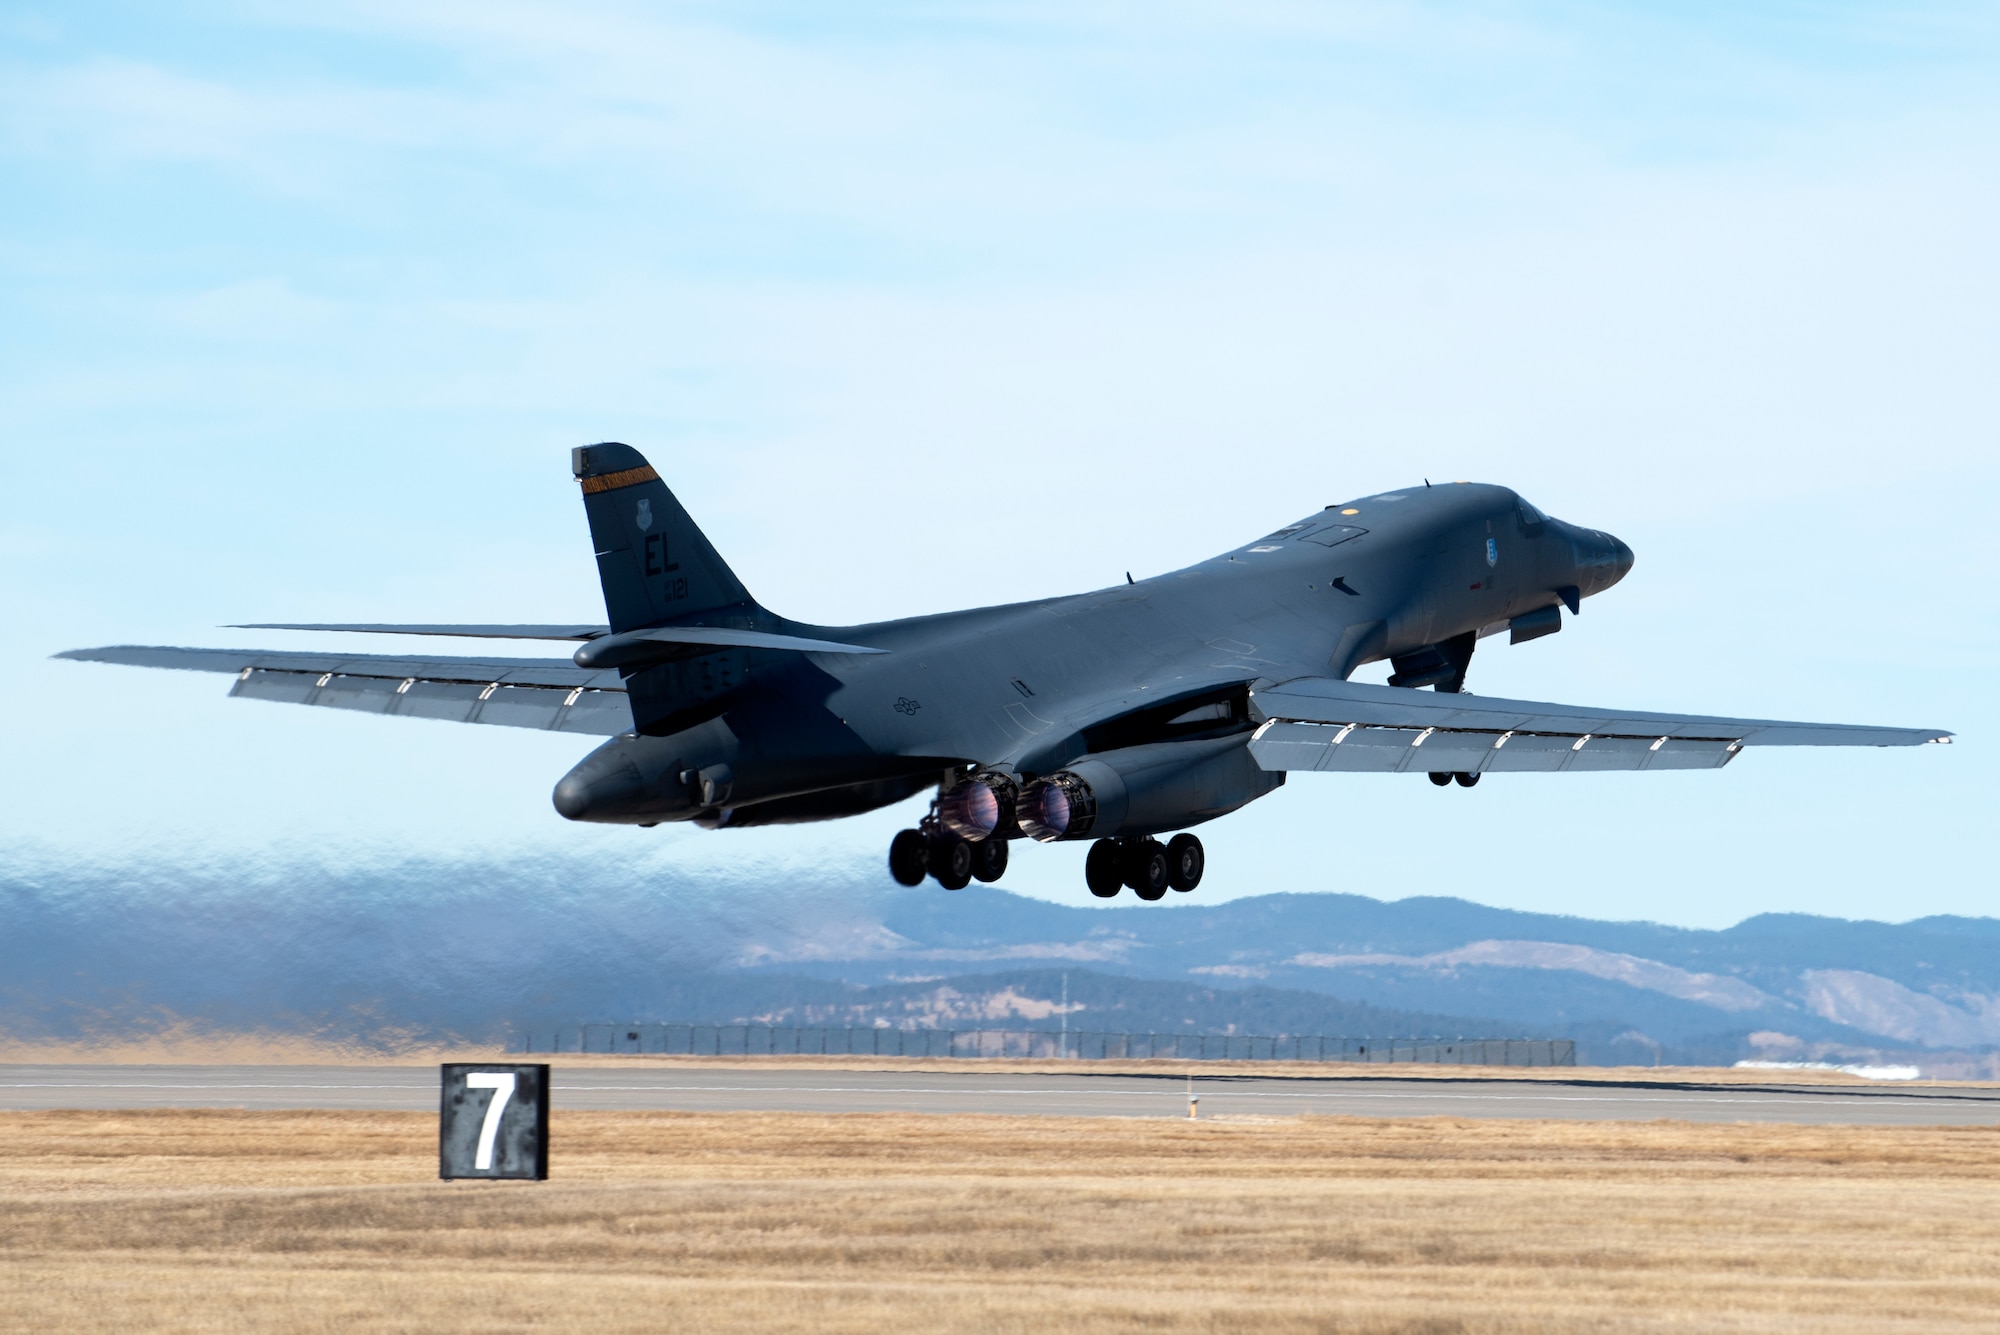 A B-1B Lancer assigned to the 37th Bomb Squadron takes off from Ellsworth Air Force Base, S.D., March 3, 2021. About 200 Ellsworth Airmen and several B-1 bombers are participating in Red Flag 21-2, one of the Air Force’s largest combat training exercises, at Nellis AFB, Nevada, March 8-19. (U.S. Air Force photo by Airman 1st Class Quentin Marx)